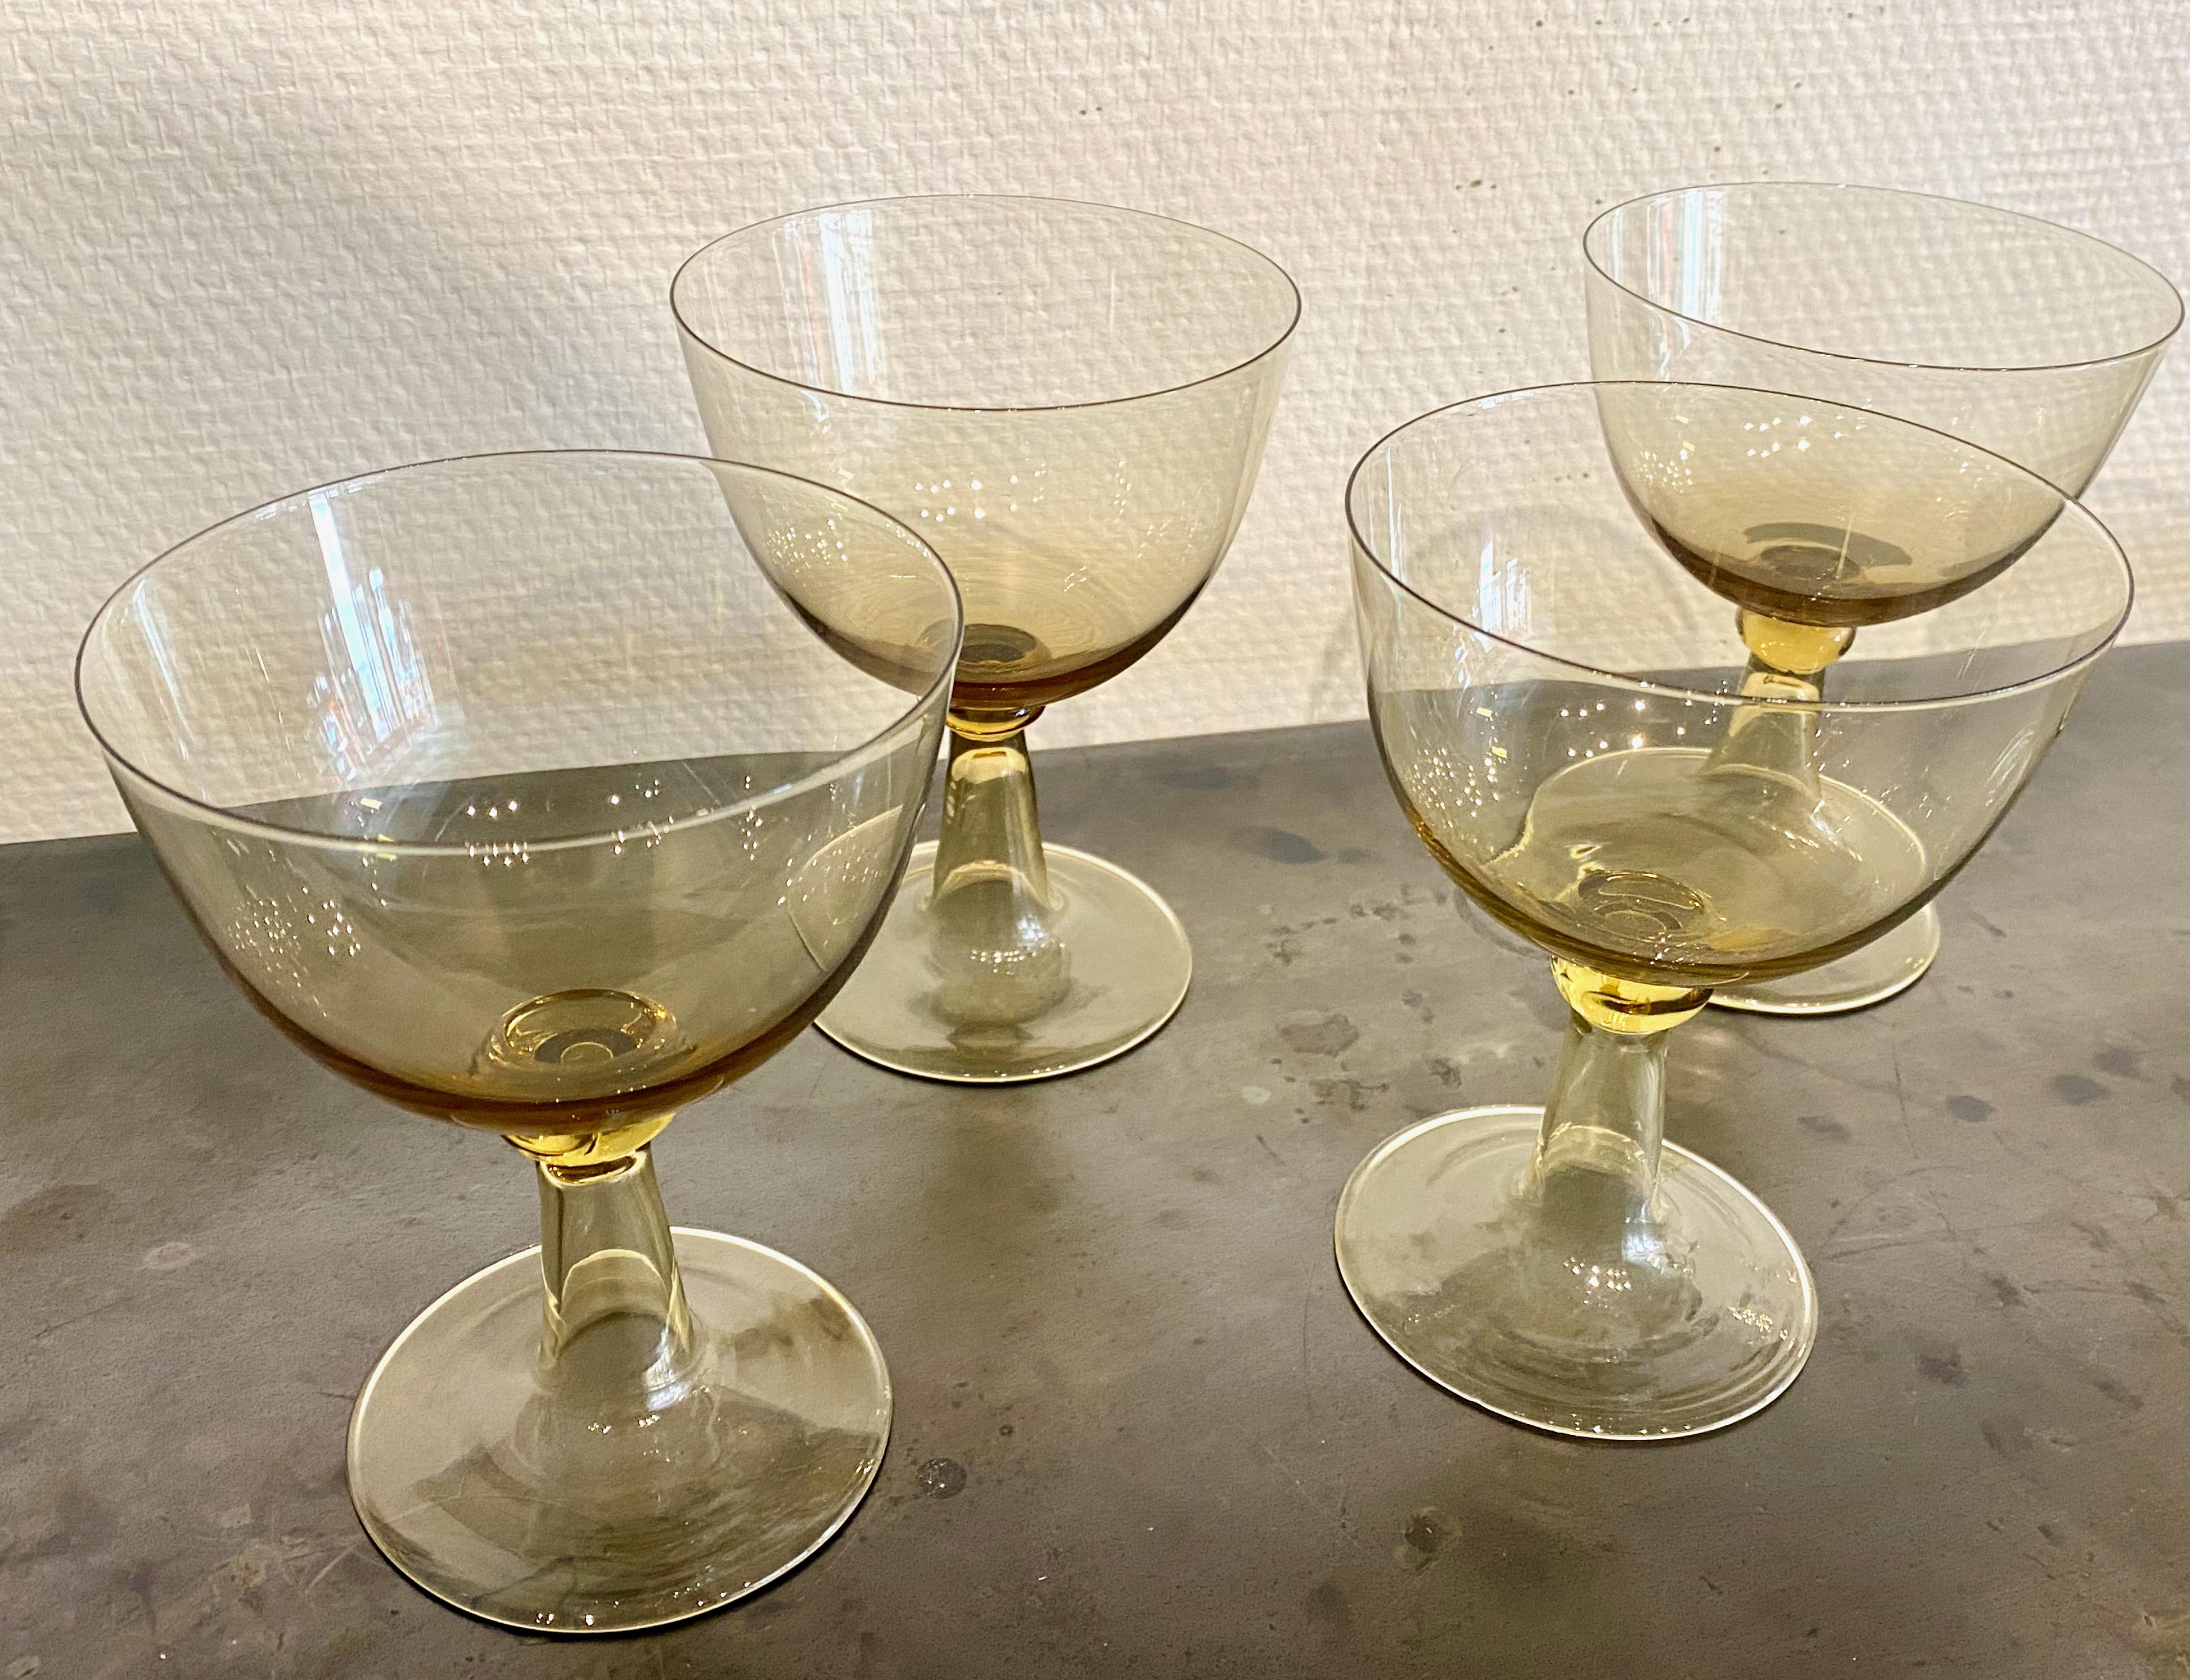 Set of 6 beautiful coupe glasses designed by Josef Frank for the company Svenskt tenn. From the discontinued pattern Murano designed in early 1950's.Slightly champagne coloured they will offer elegance to any table setting and dessert.
Born in